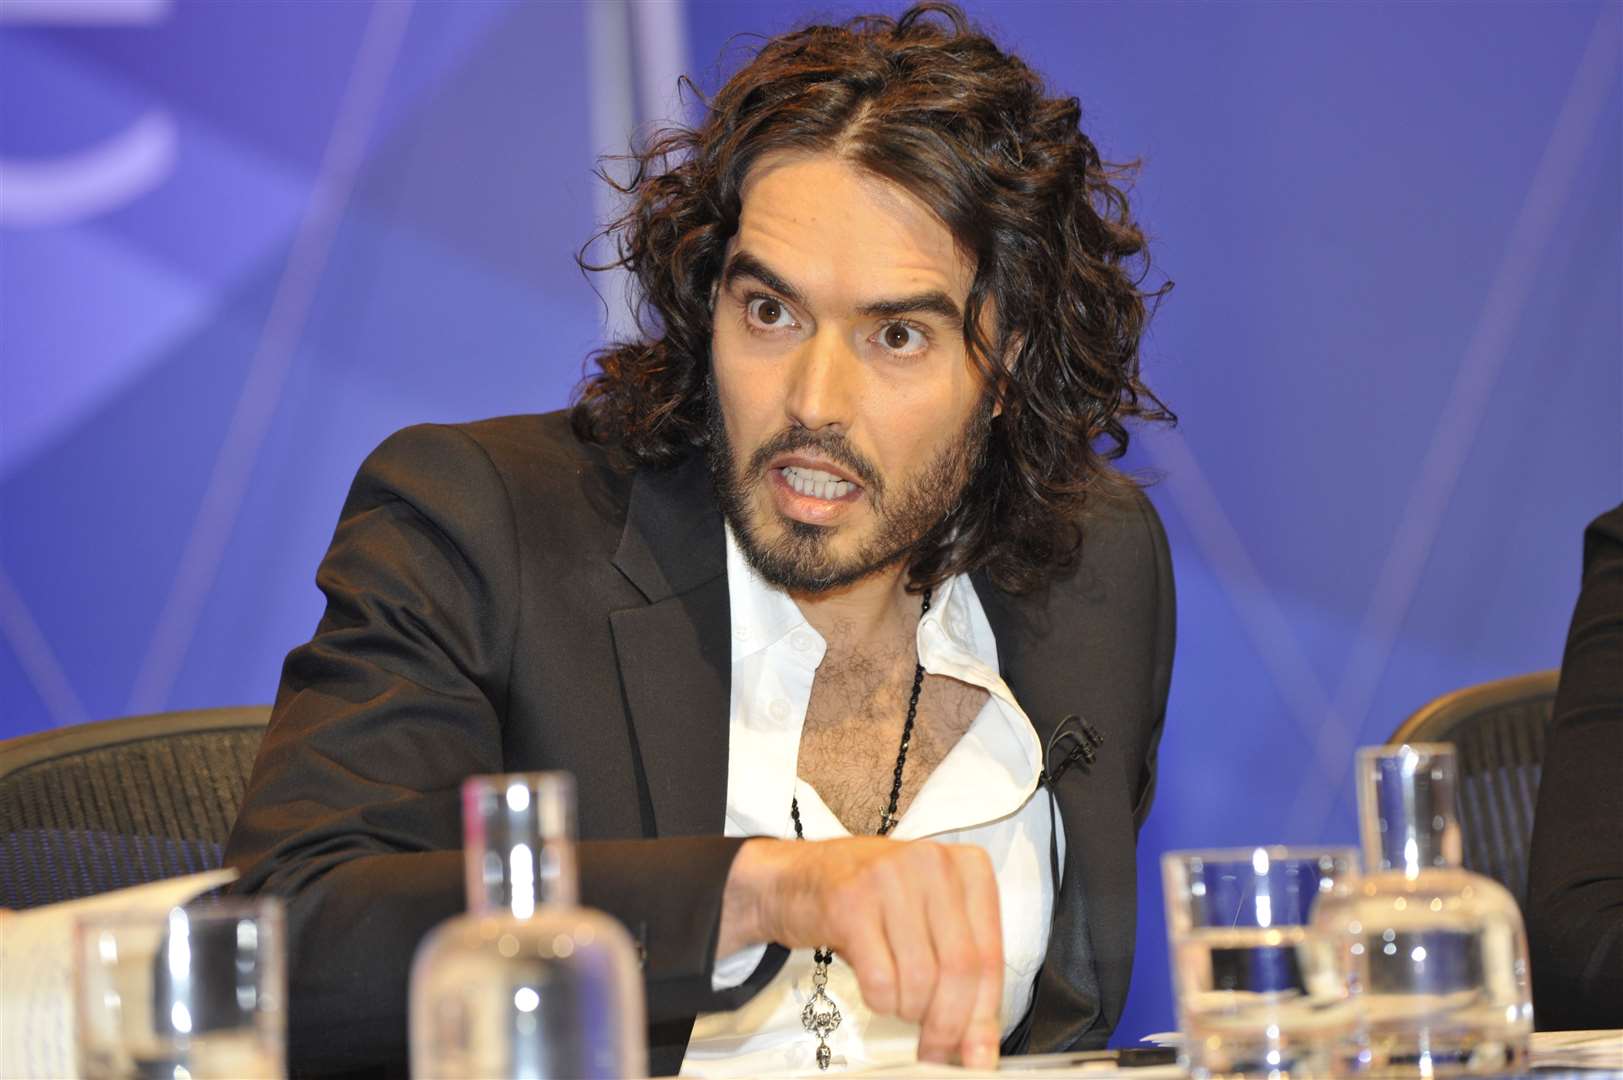 Russell Brand: “Deluded enough to believe he represents a threat to ‘the system’”.